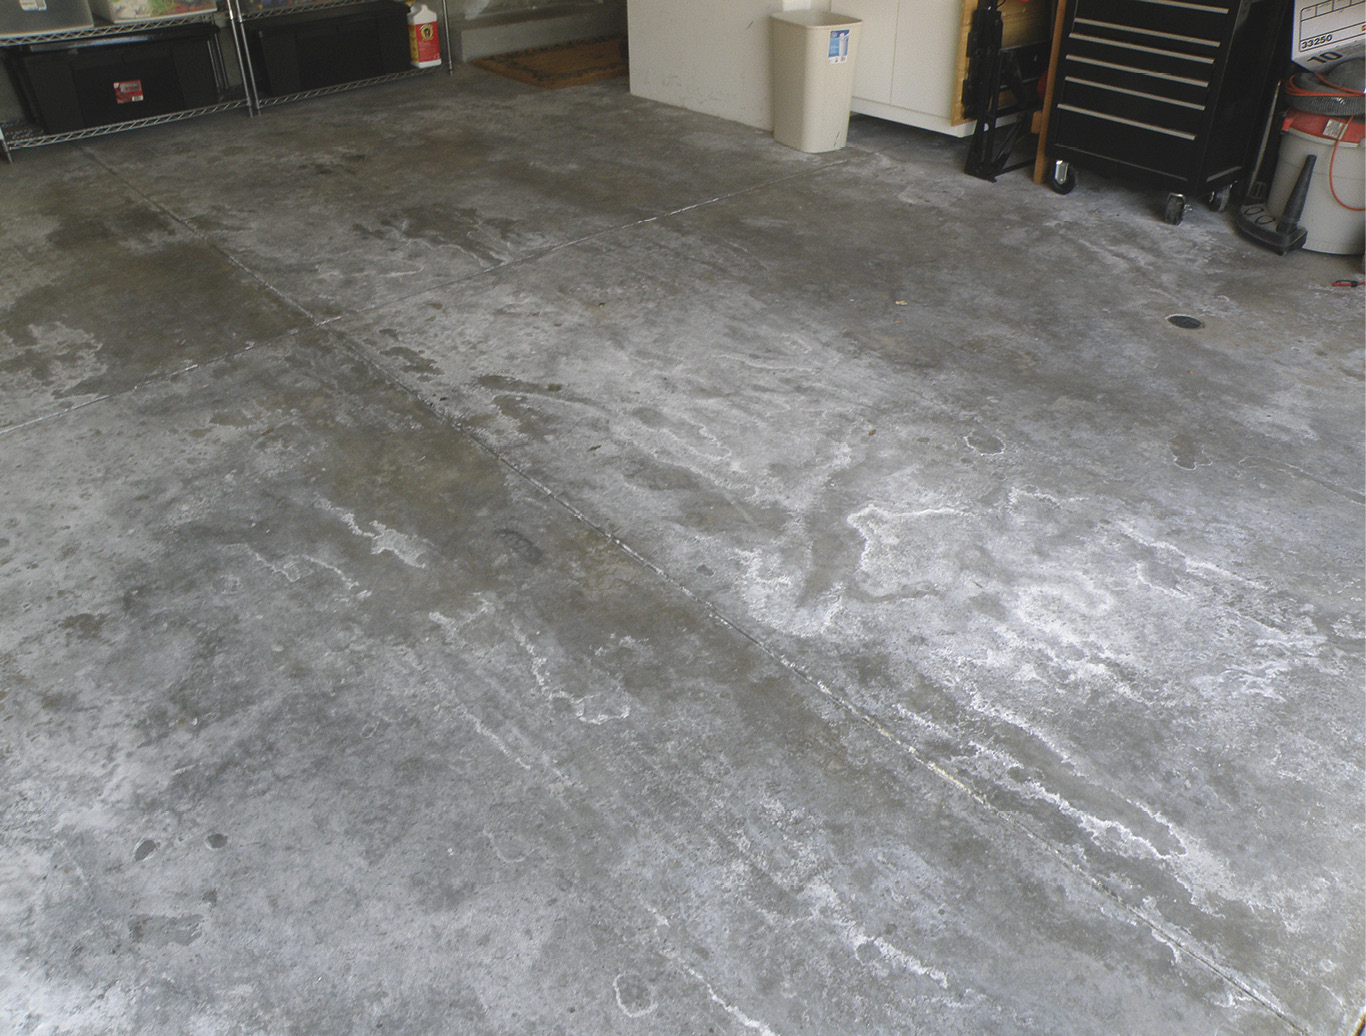 A picture of a concrete slab with visible signs of moisture problems